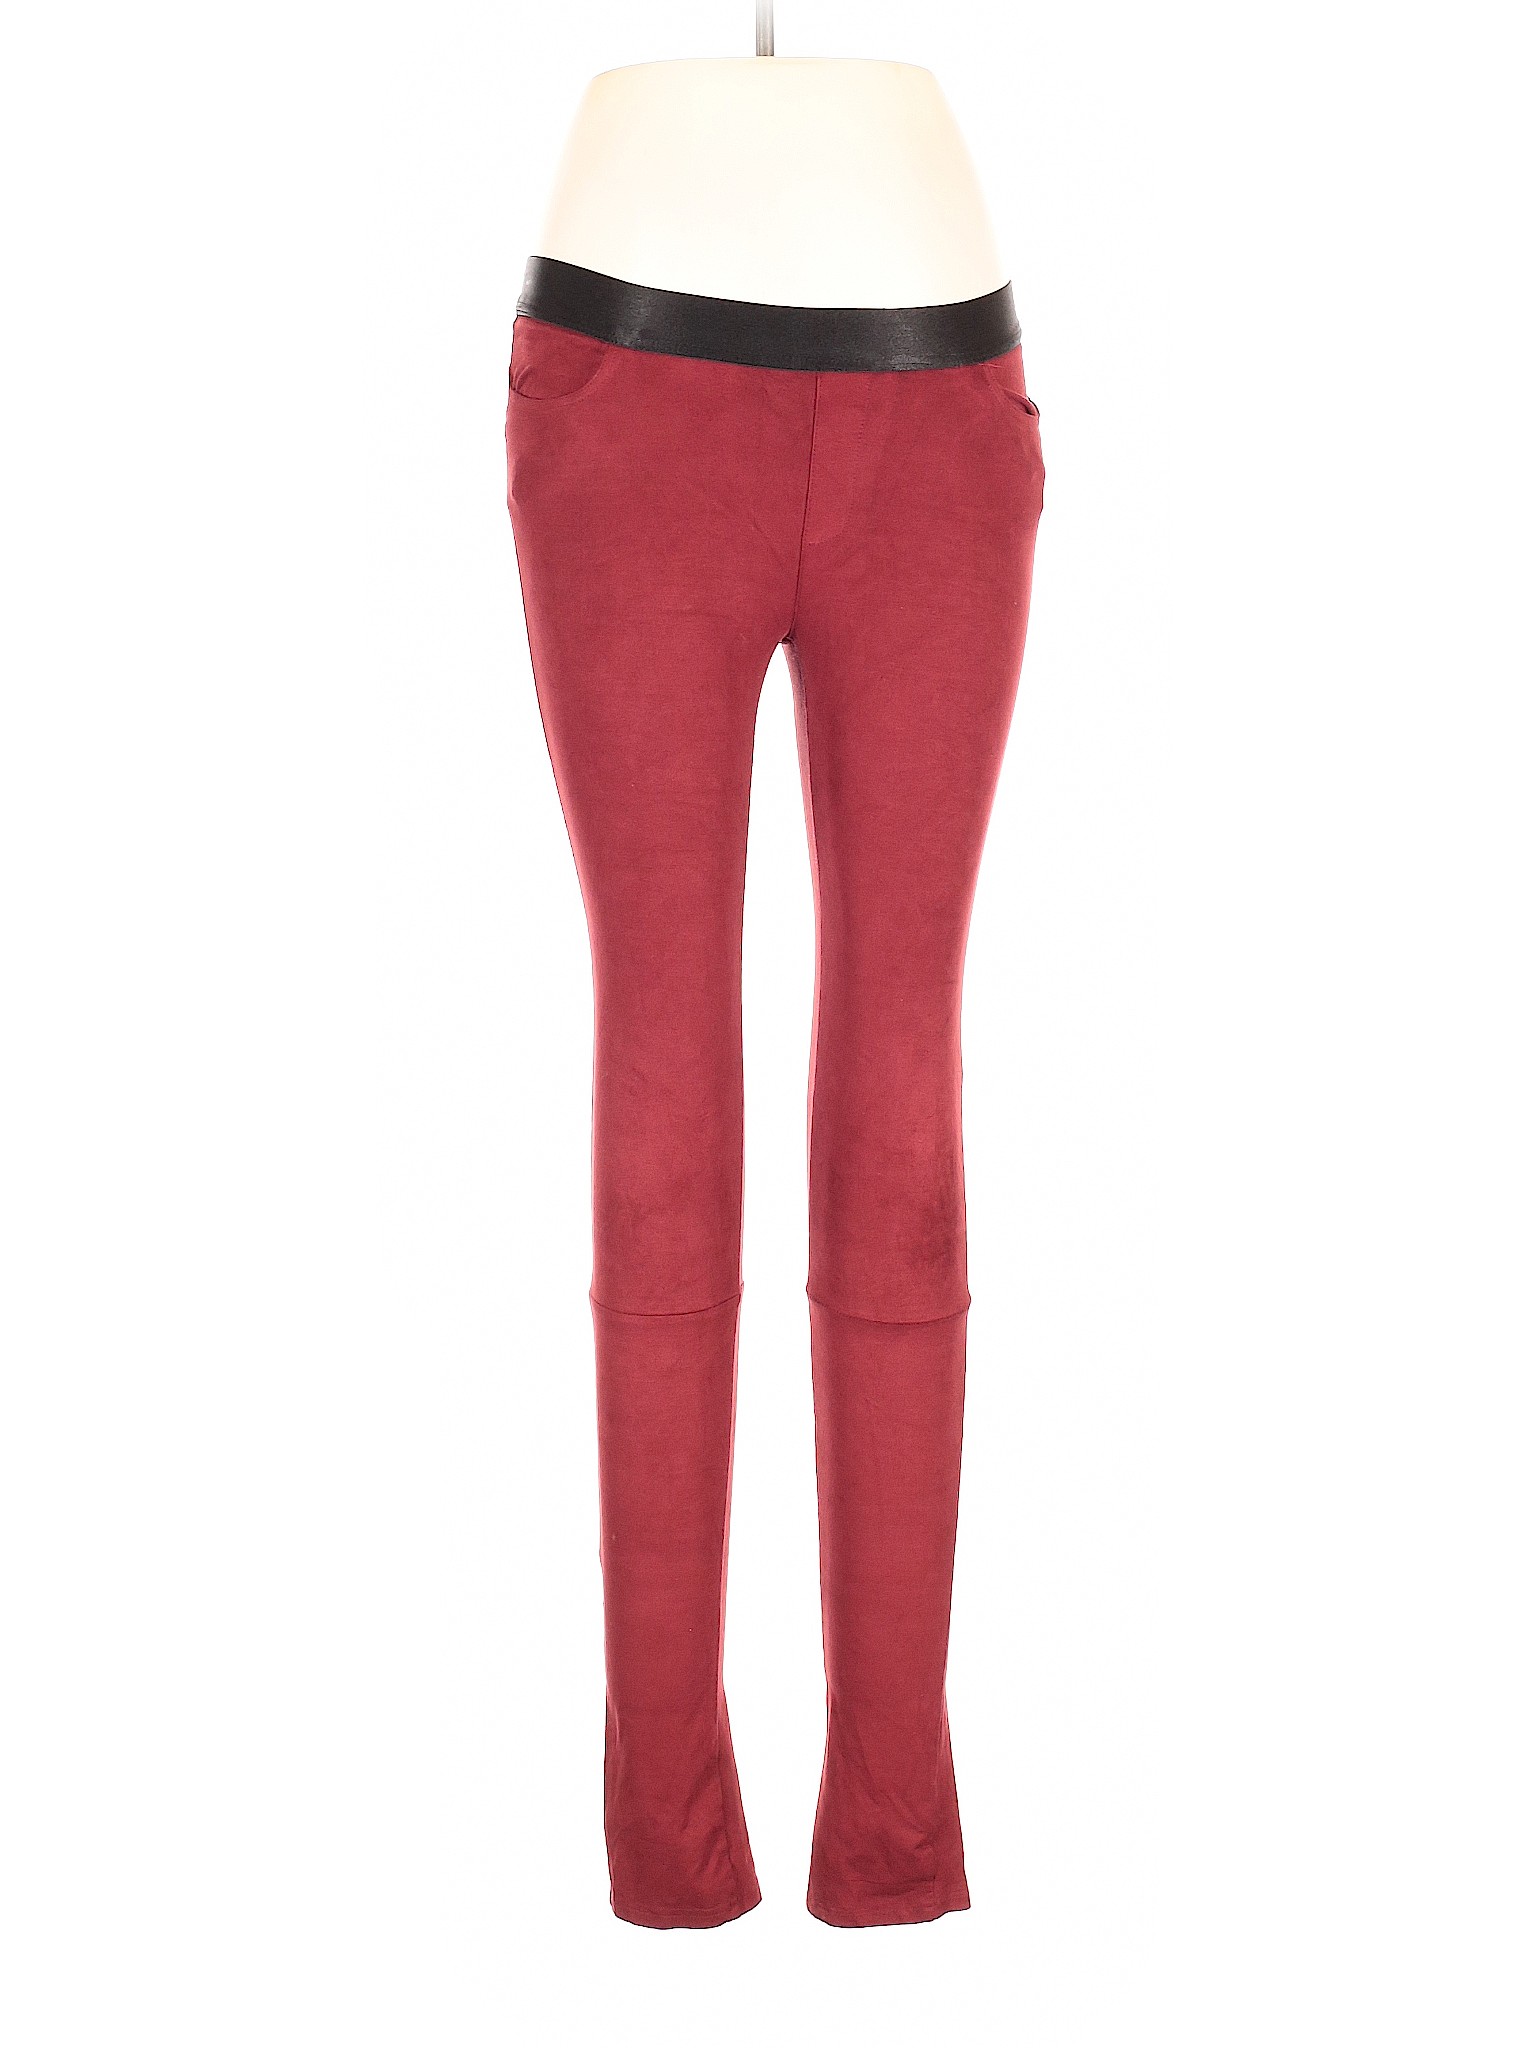 womens red faux leather pants